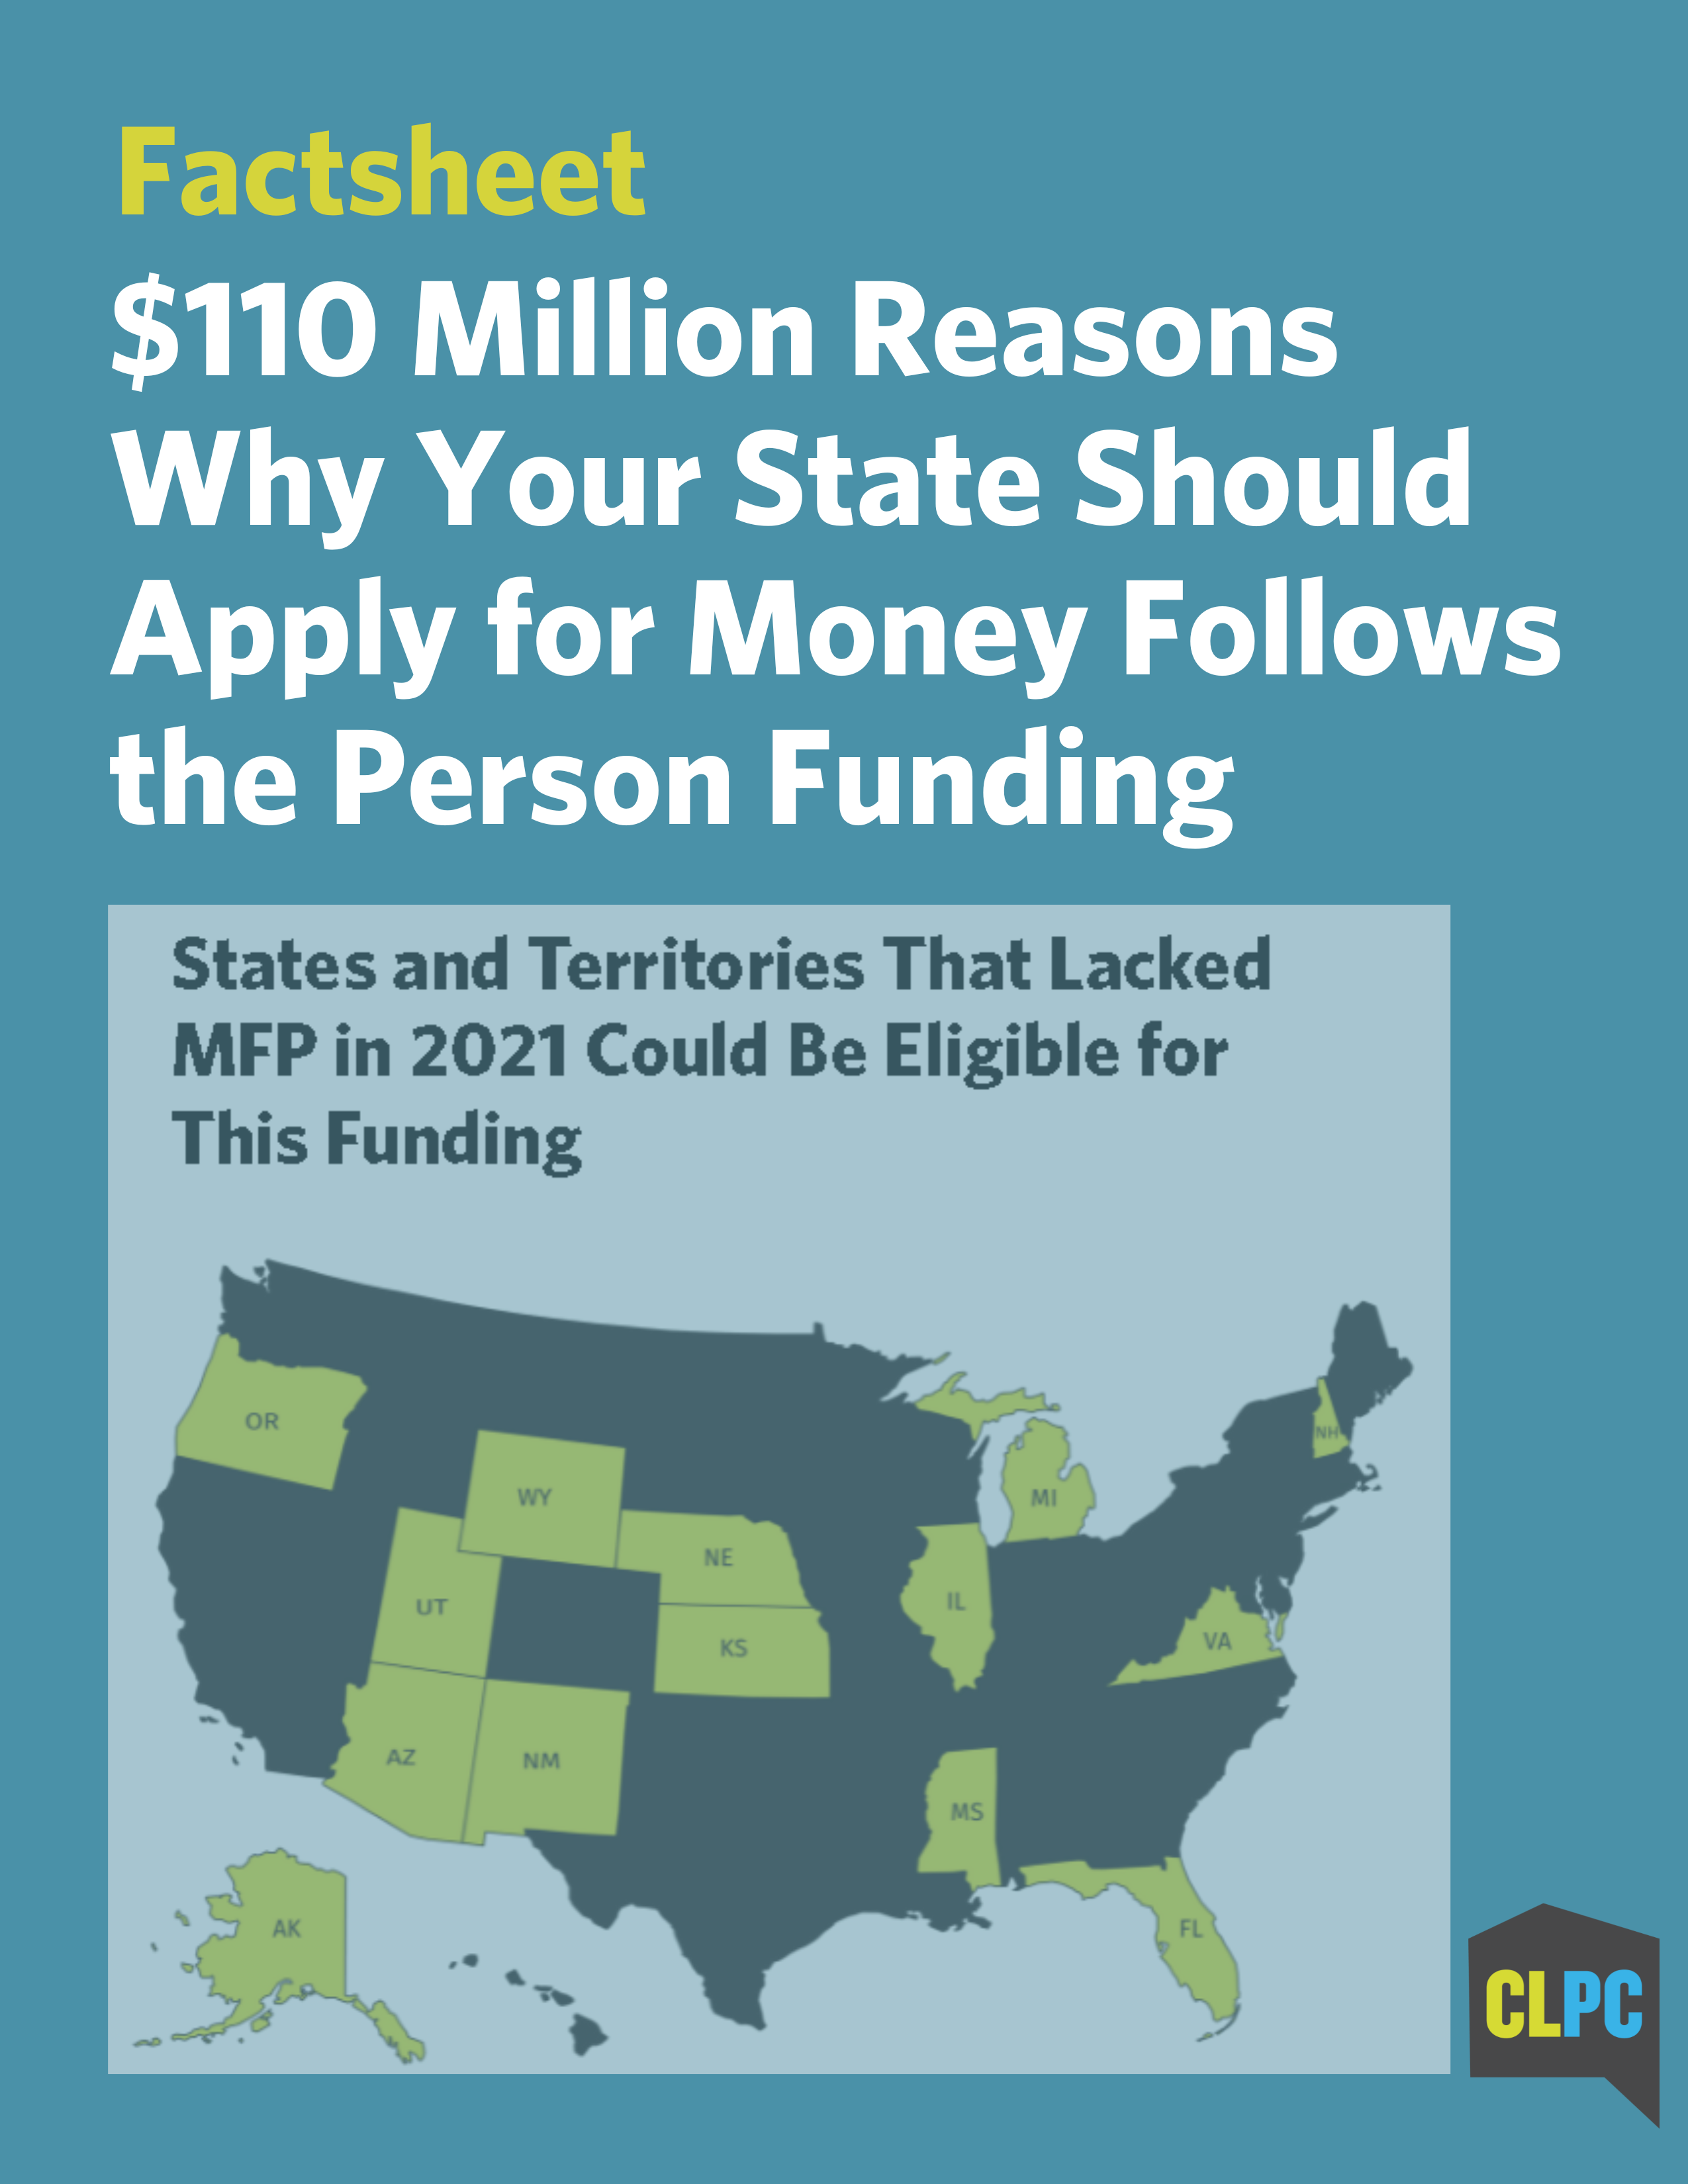 $110 Million Reasons Why Your State Should Apply for Money Follows the Person Funding